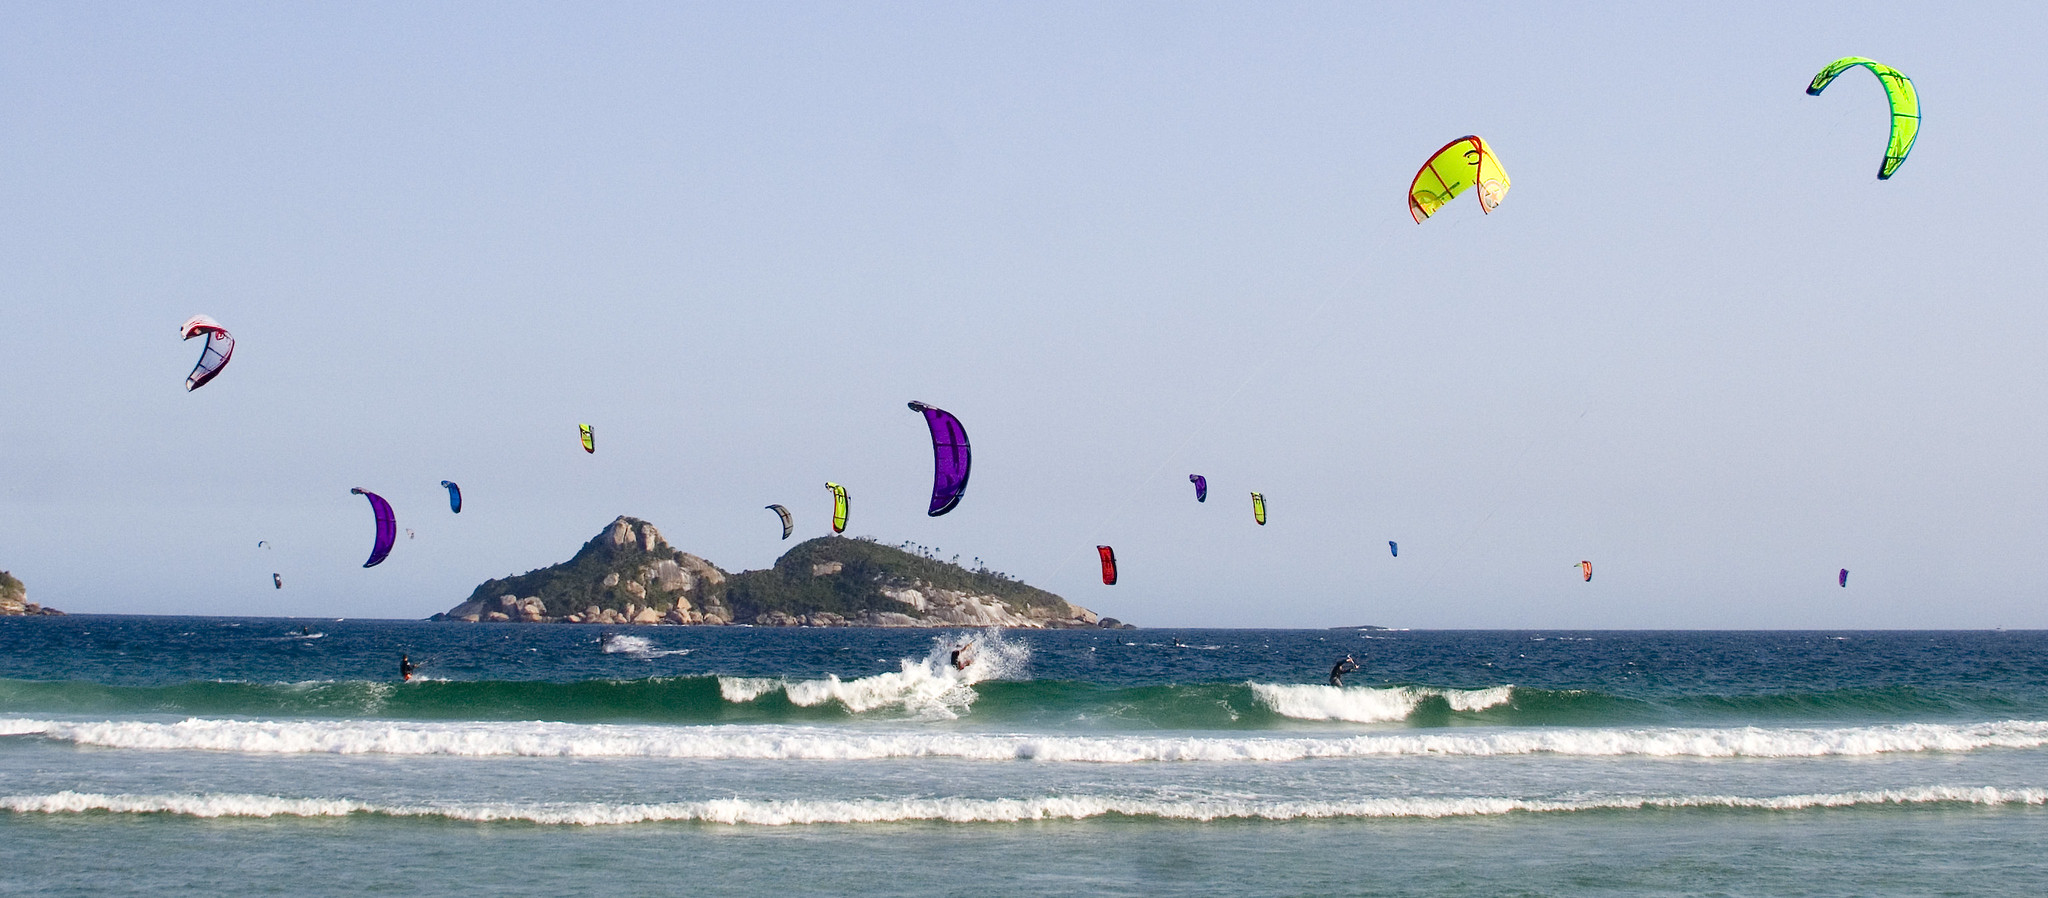 Low gentle waves appear in the foreground, spread across the width of the photo. Larger waves break behind them. Two kitesurfers crest the largest wave. The sky is dotted with kitesurfing kites. In the background, a rocky, forested island is visible on the horizon.